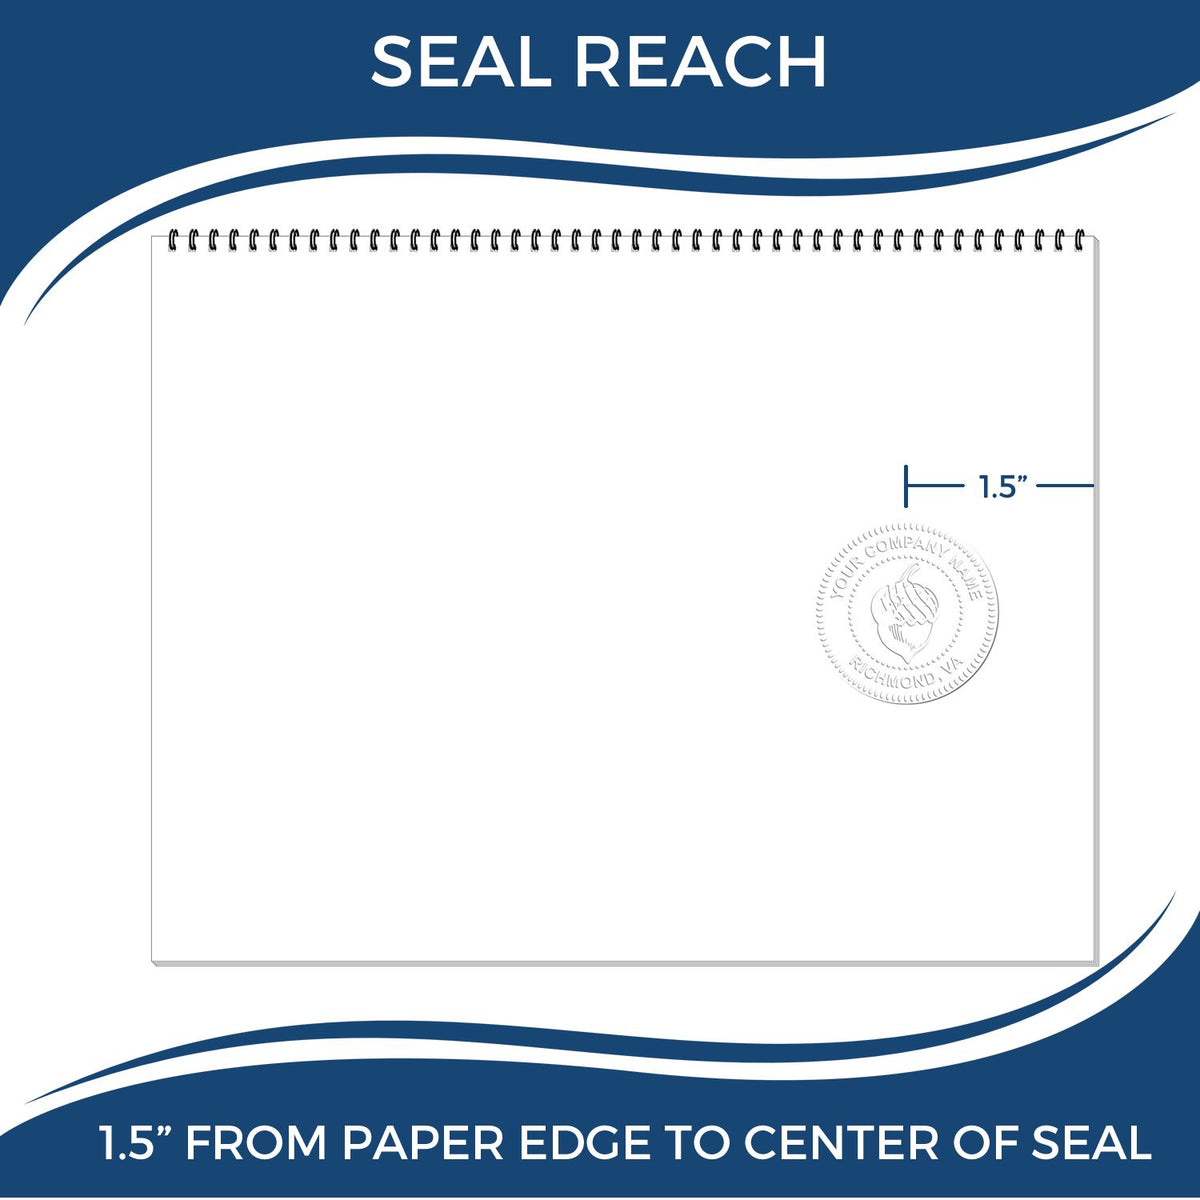 An infographic showing the seal reach which is represented by a ruler and a miniature seal image of the Gift Montana Geologist Seal